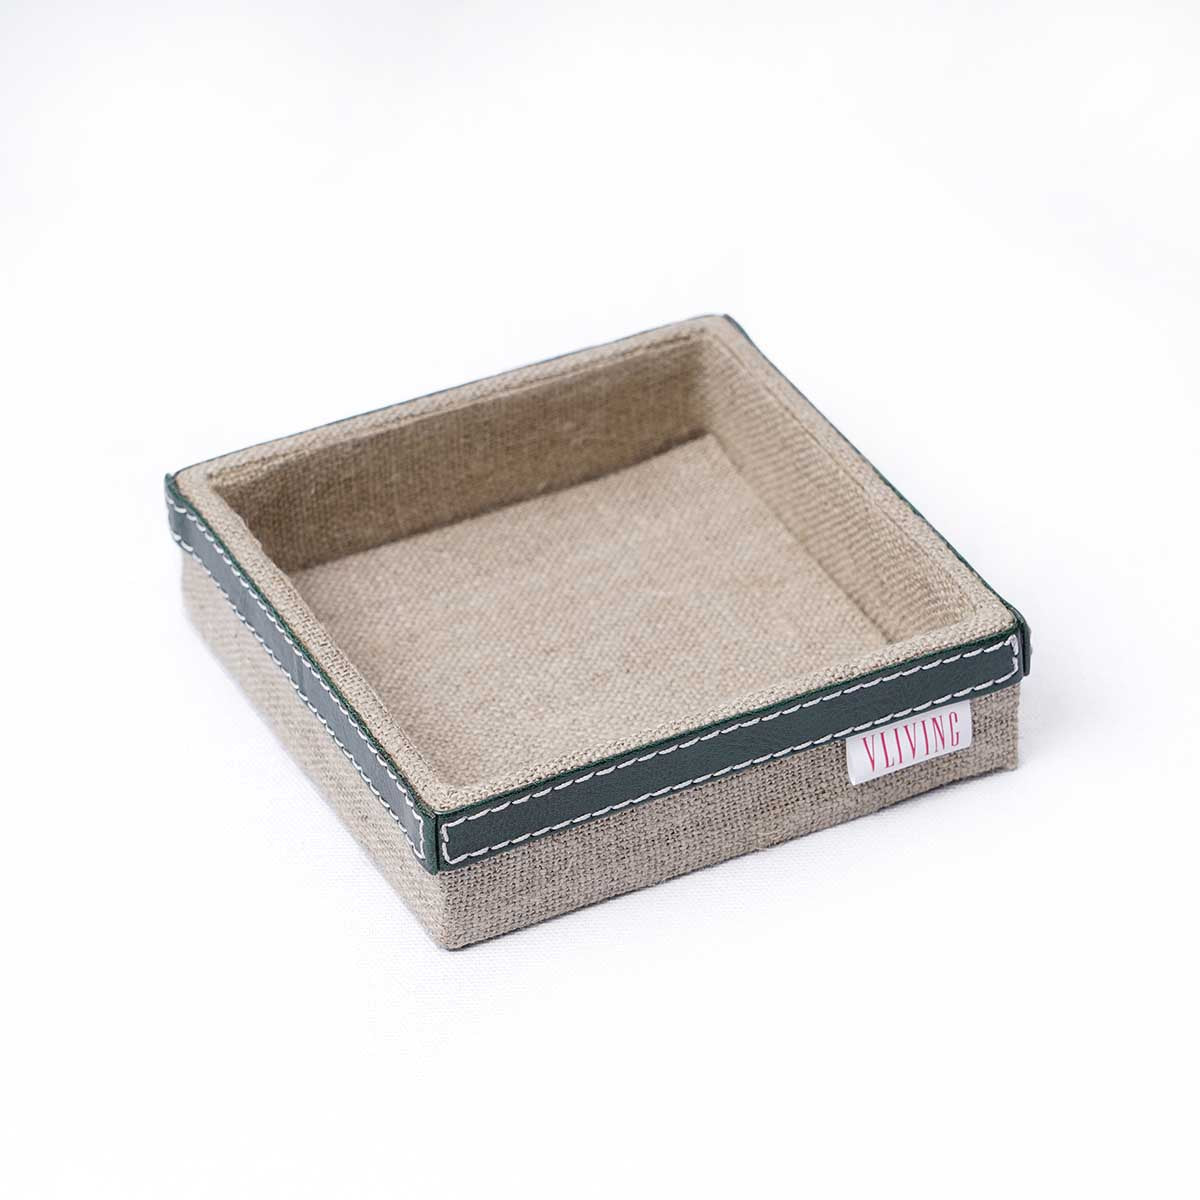 Trays in Natural Linen with green Leather trims, Rustic Holiday Decor Christmas, sizes available